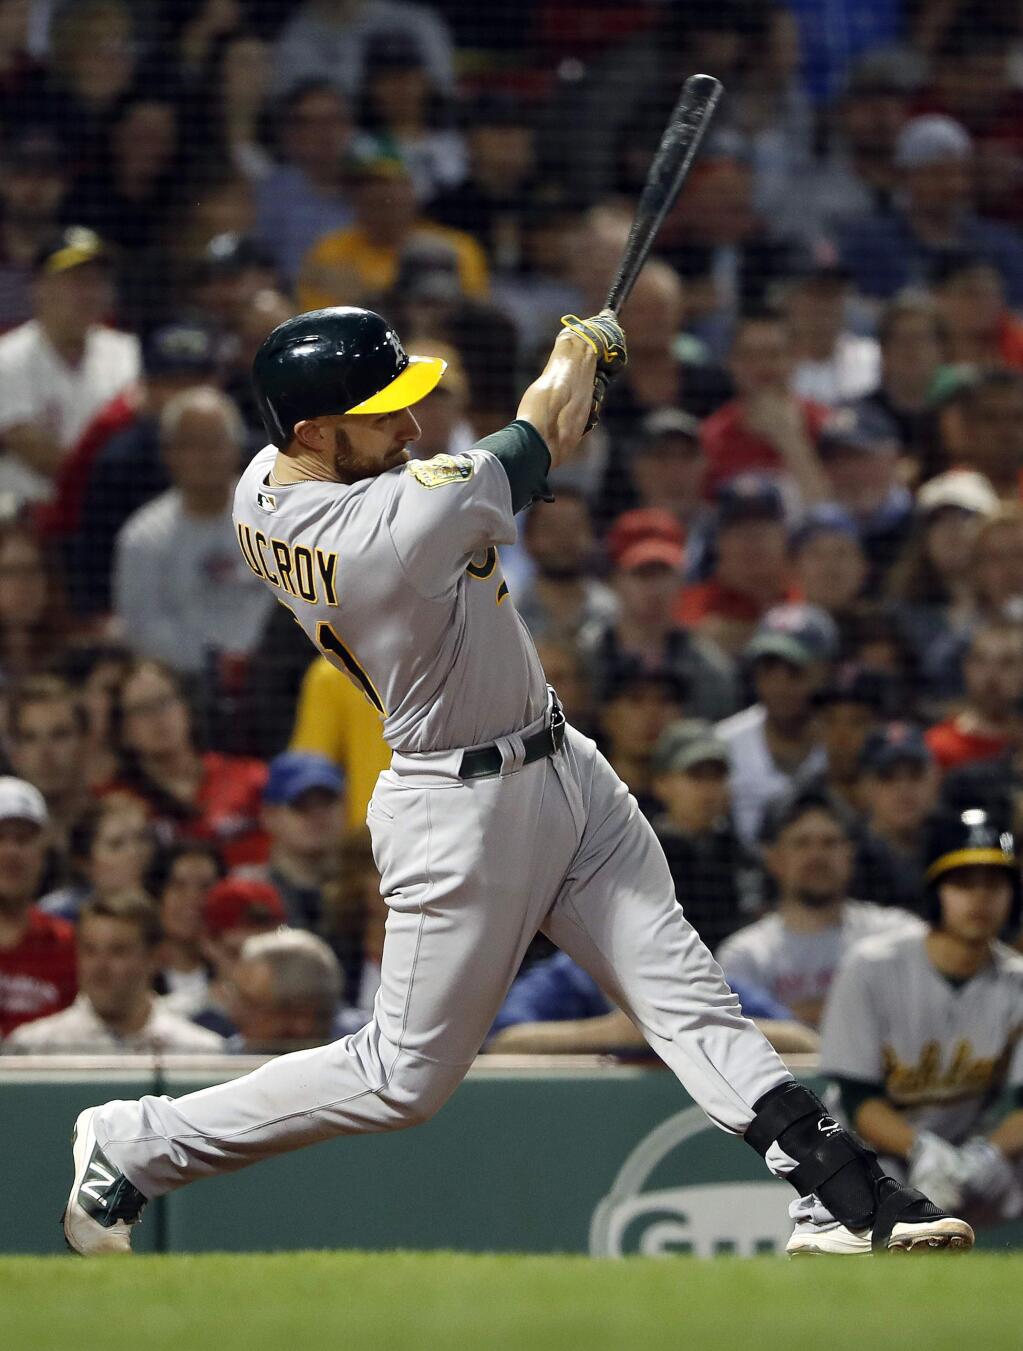 Oakland Athletics' Jonathan Lucroy follows through on a two-run double against the Boston Red Sox during the fourth inning of a baseball game at Fenway Park in Boston Monday, May 14, 2018. (AP Photo/Winslow Townson)